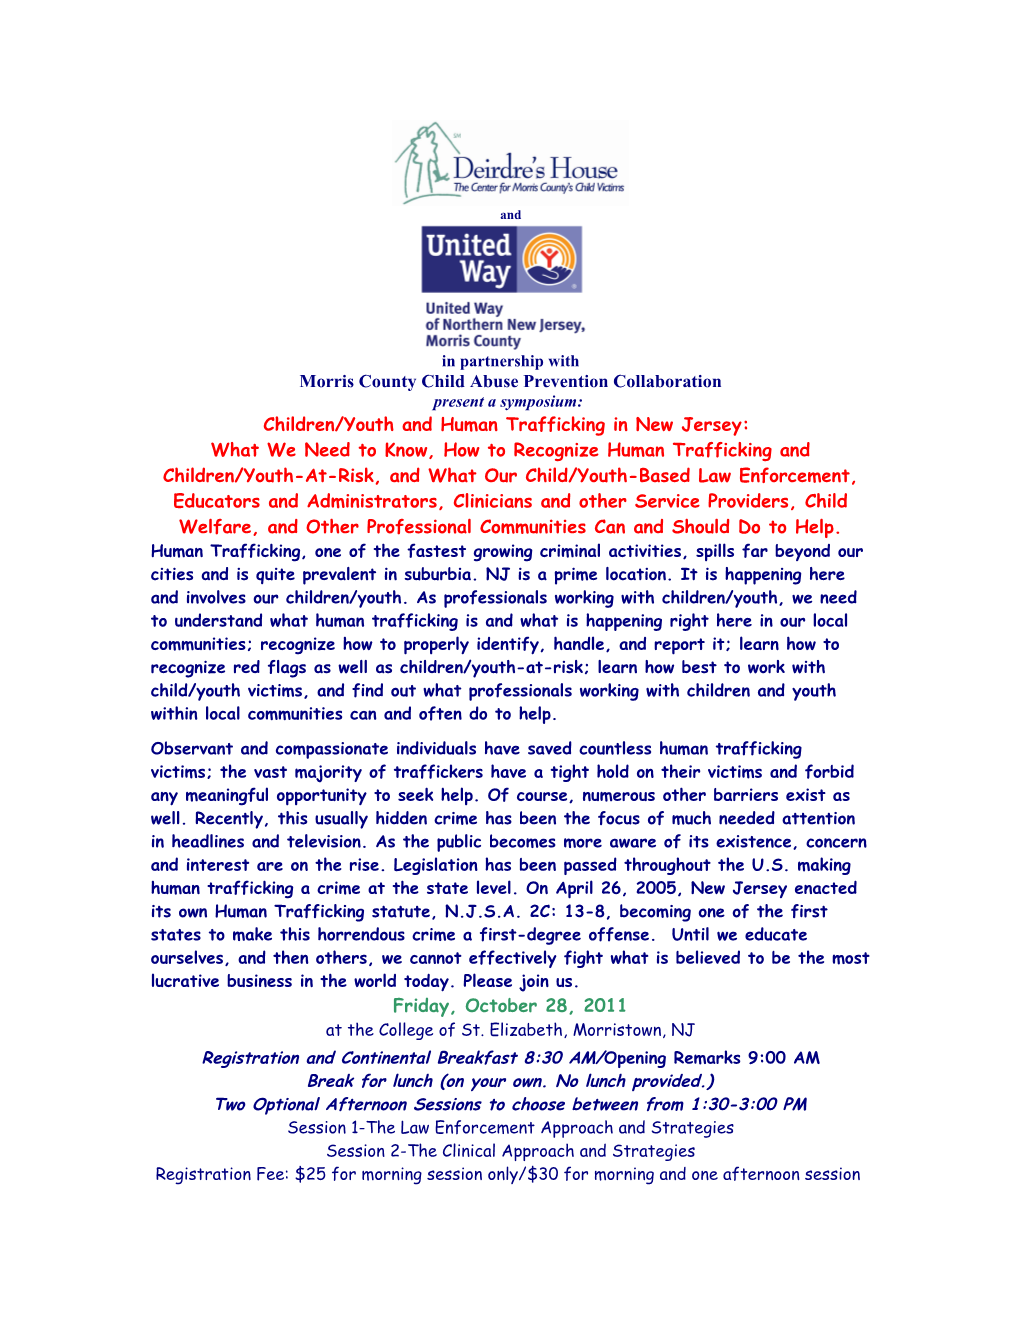 Morris County Child Abuse Prevention Collaboration